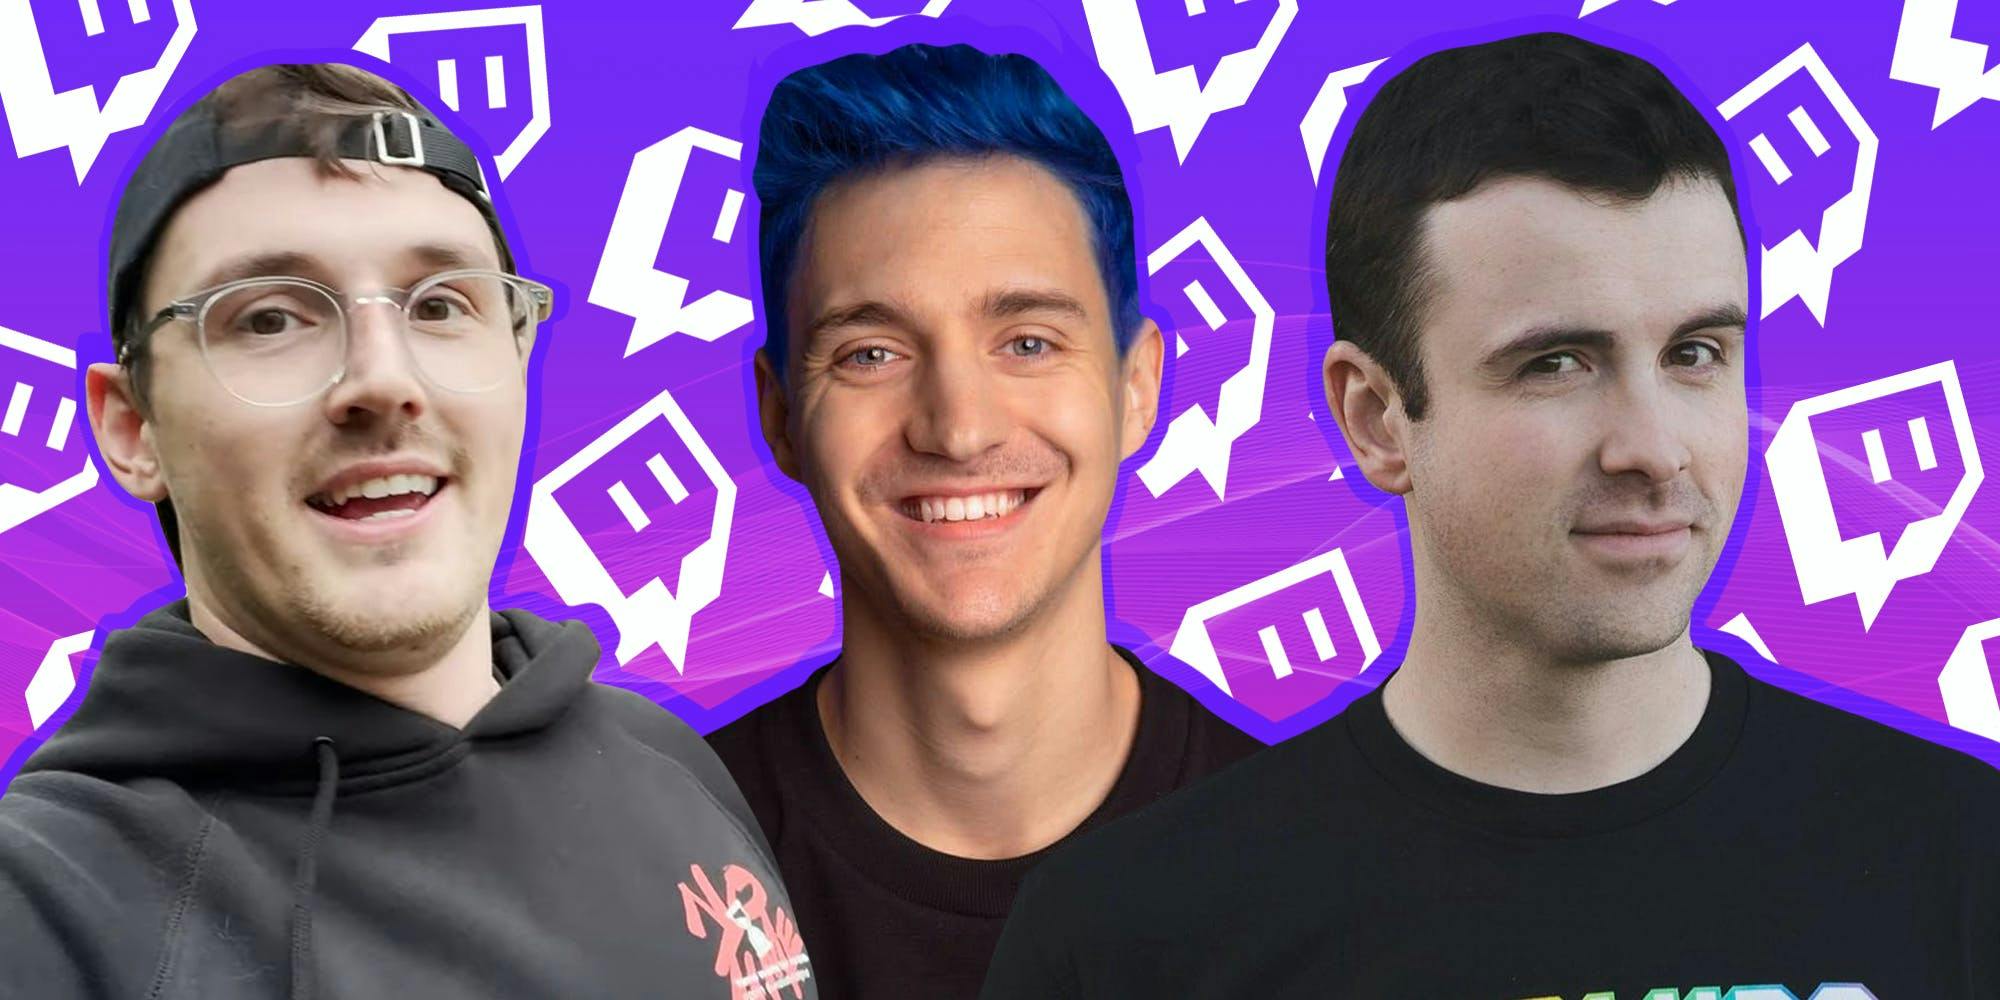 10 of the Richest Twitch Streamers and What Their Success Can Teach Us